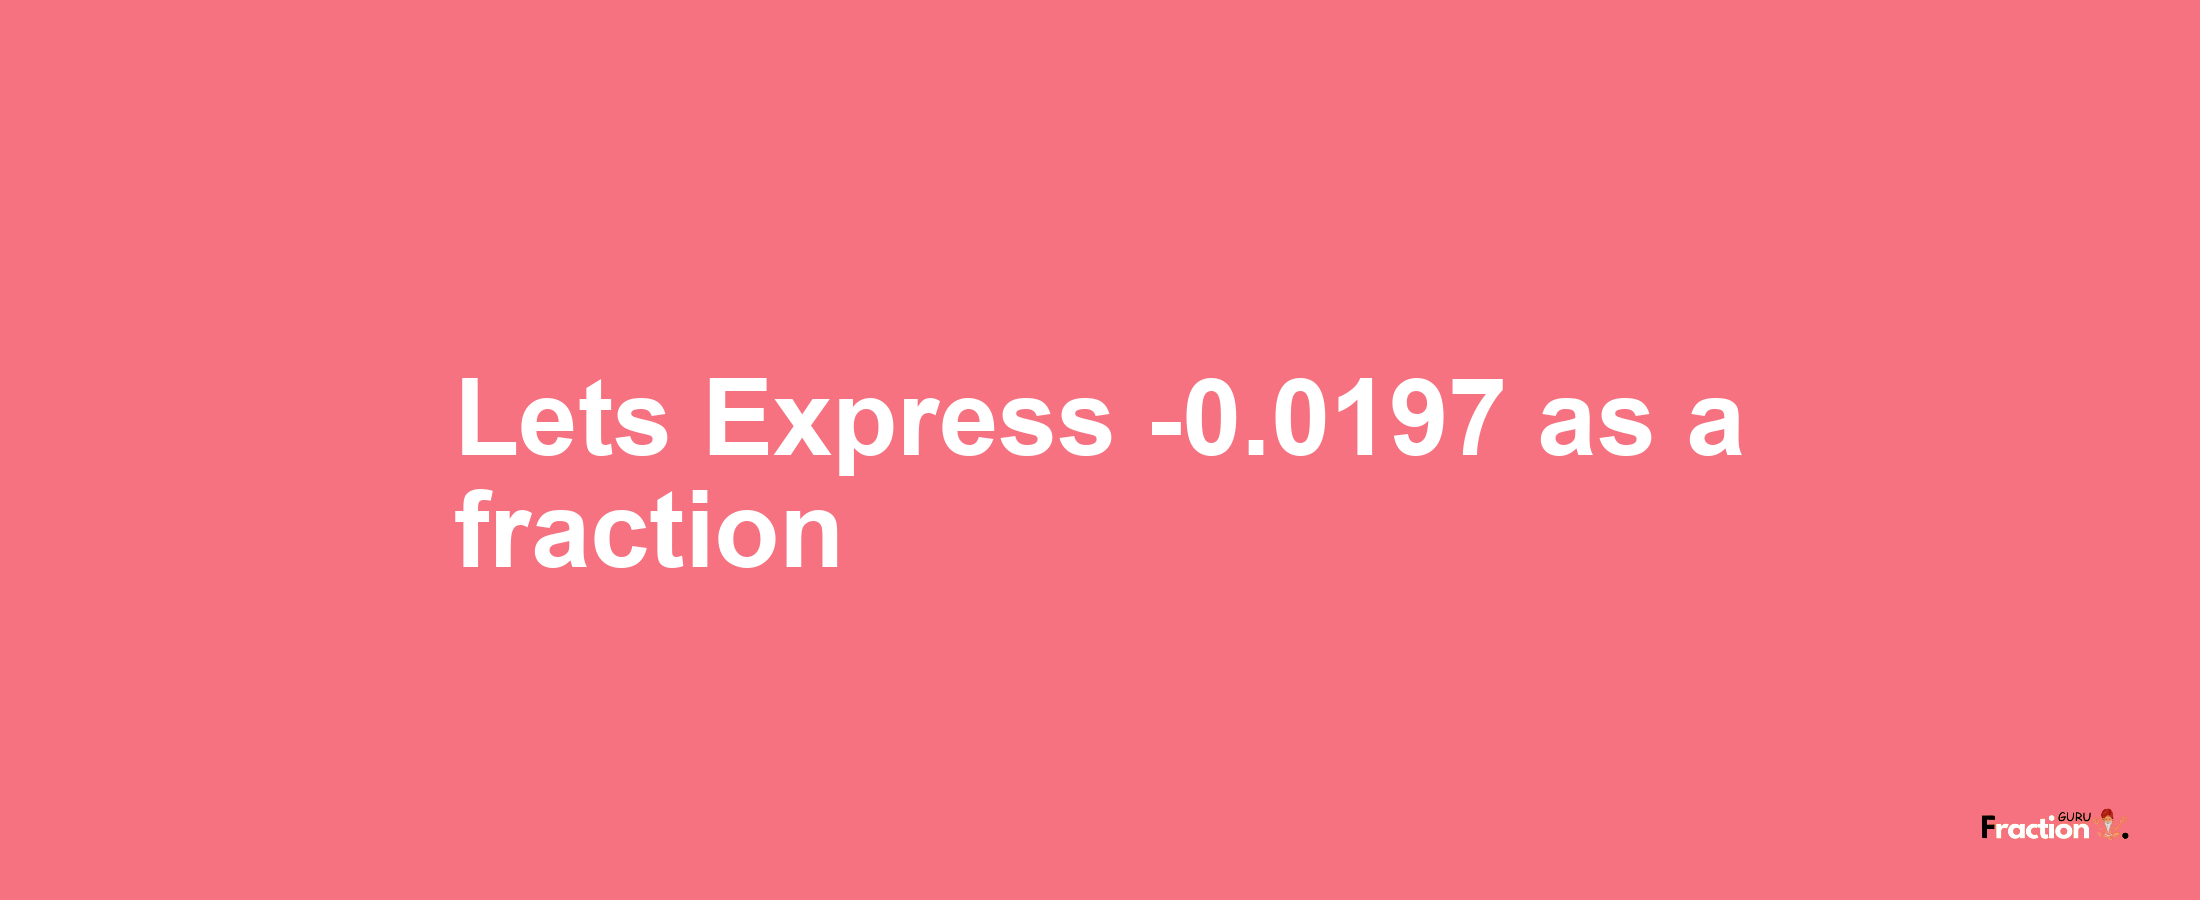 Lets Express -0.0197 as afraction